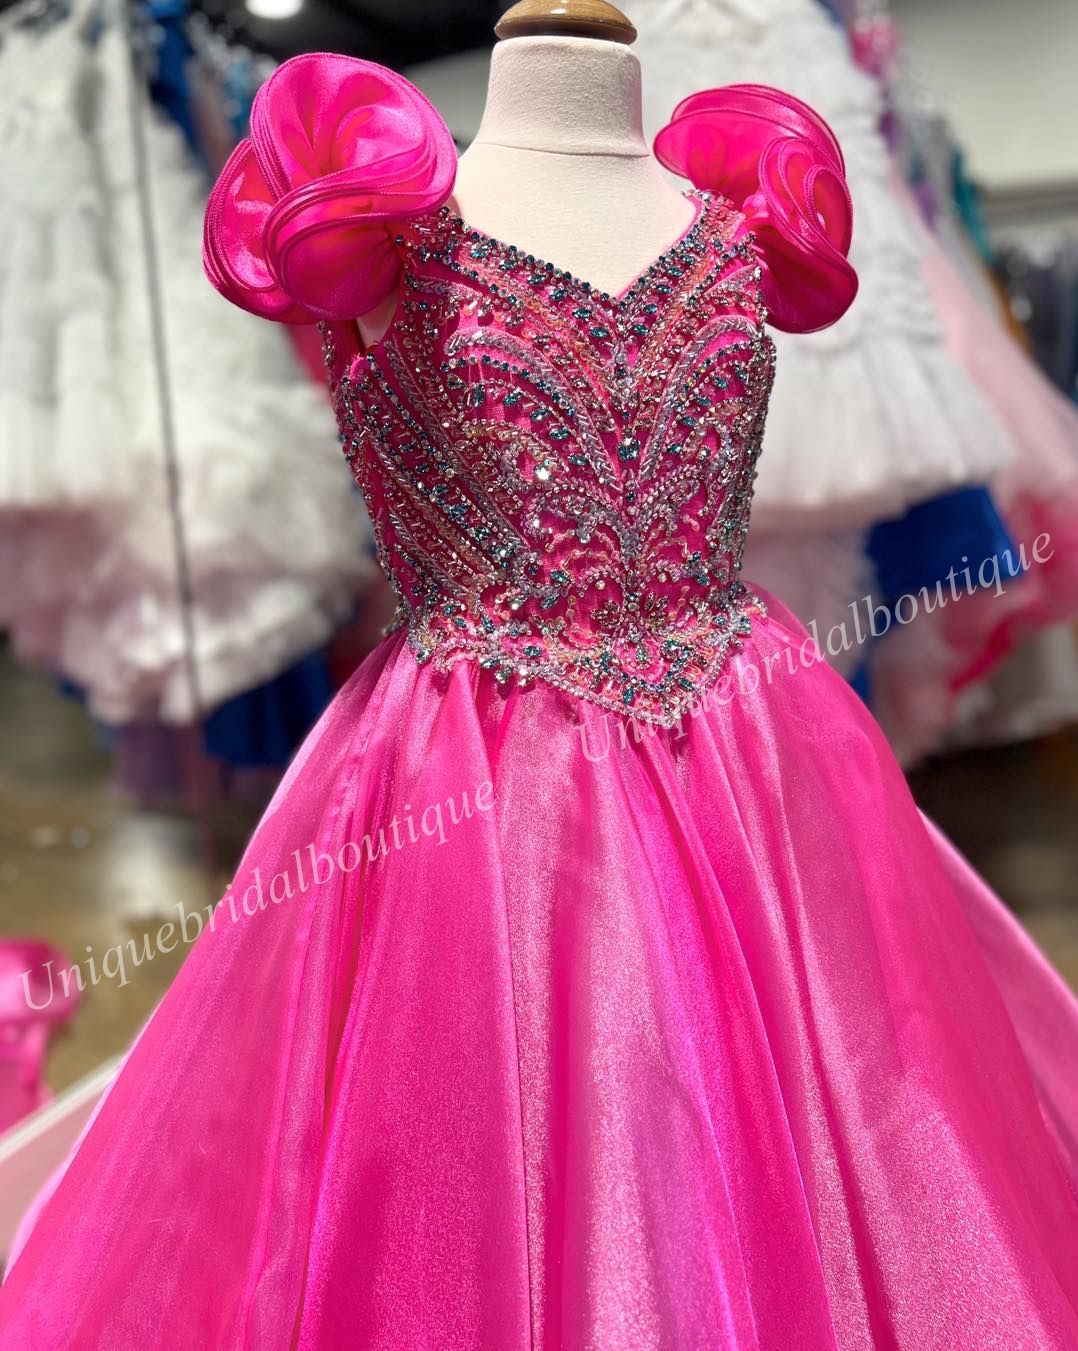 Hot Pink Girl Pageant Dress Teens Metallic Organza Little Kid Princess Birthday Formal Party Gown Toddler Preteens Tiny Young Junior Miss Flower Mint Ruffle Sleeves